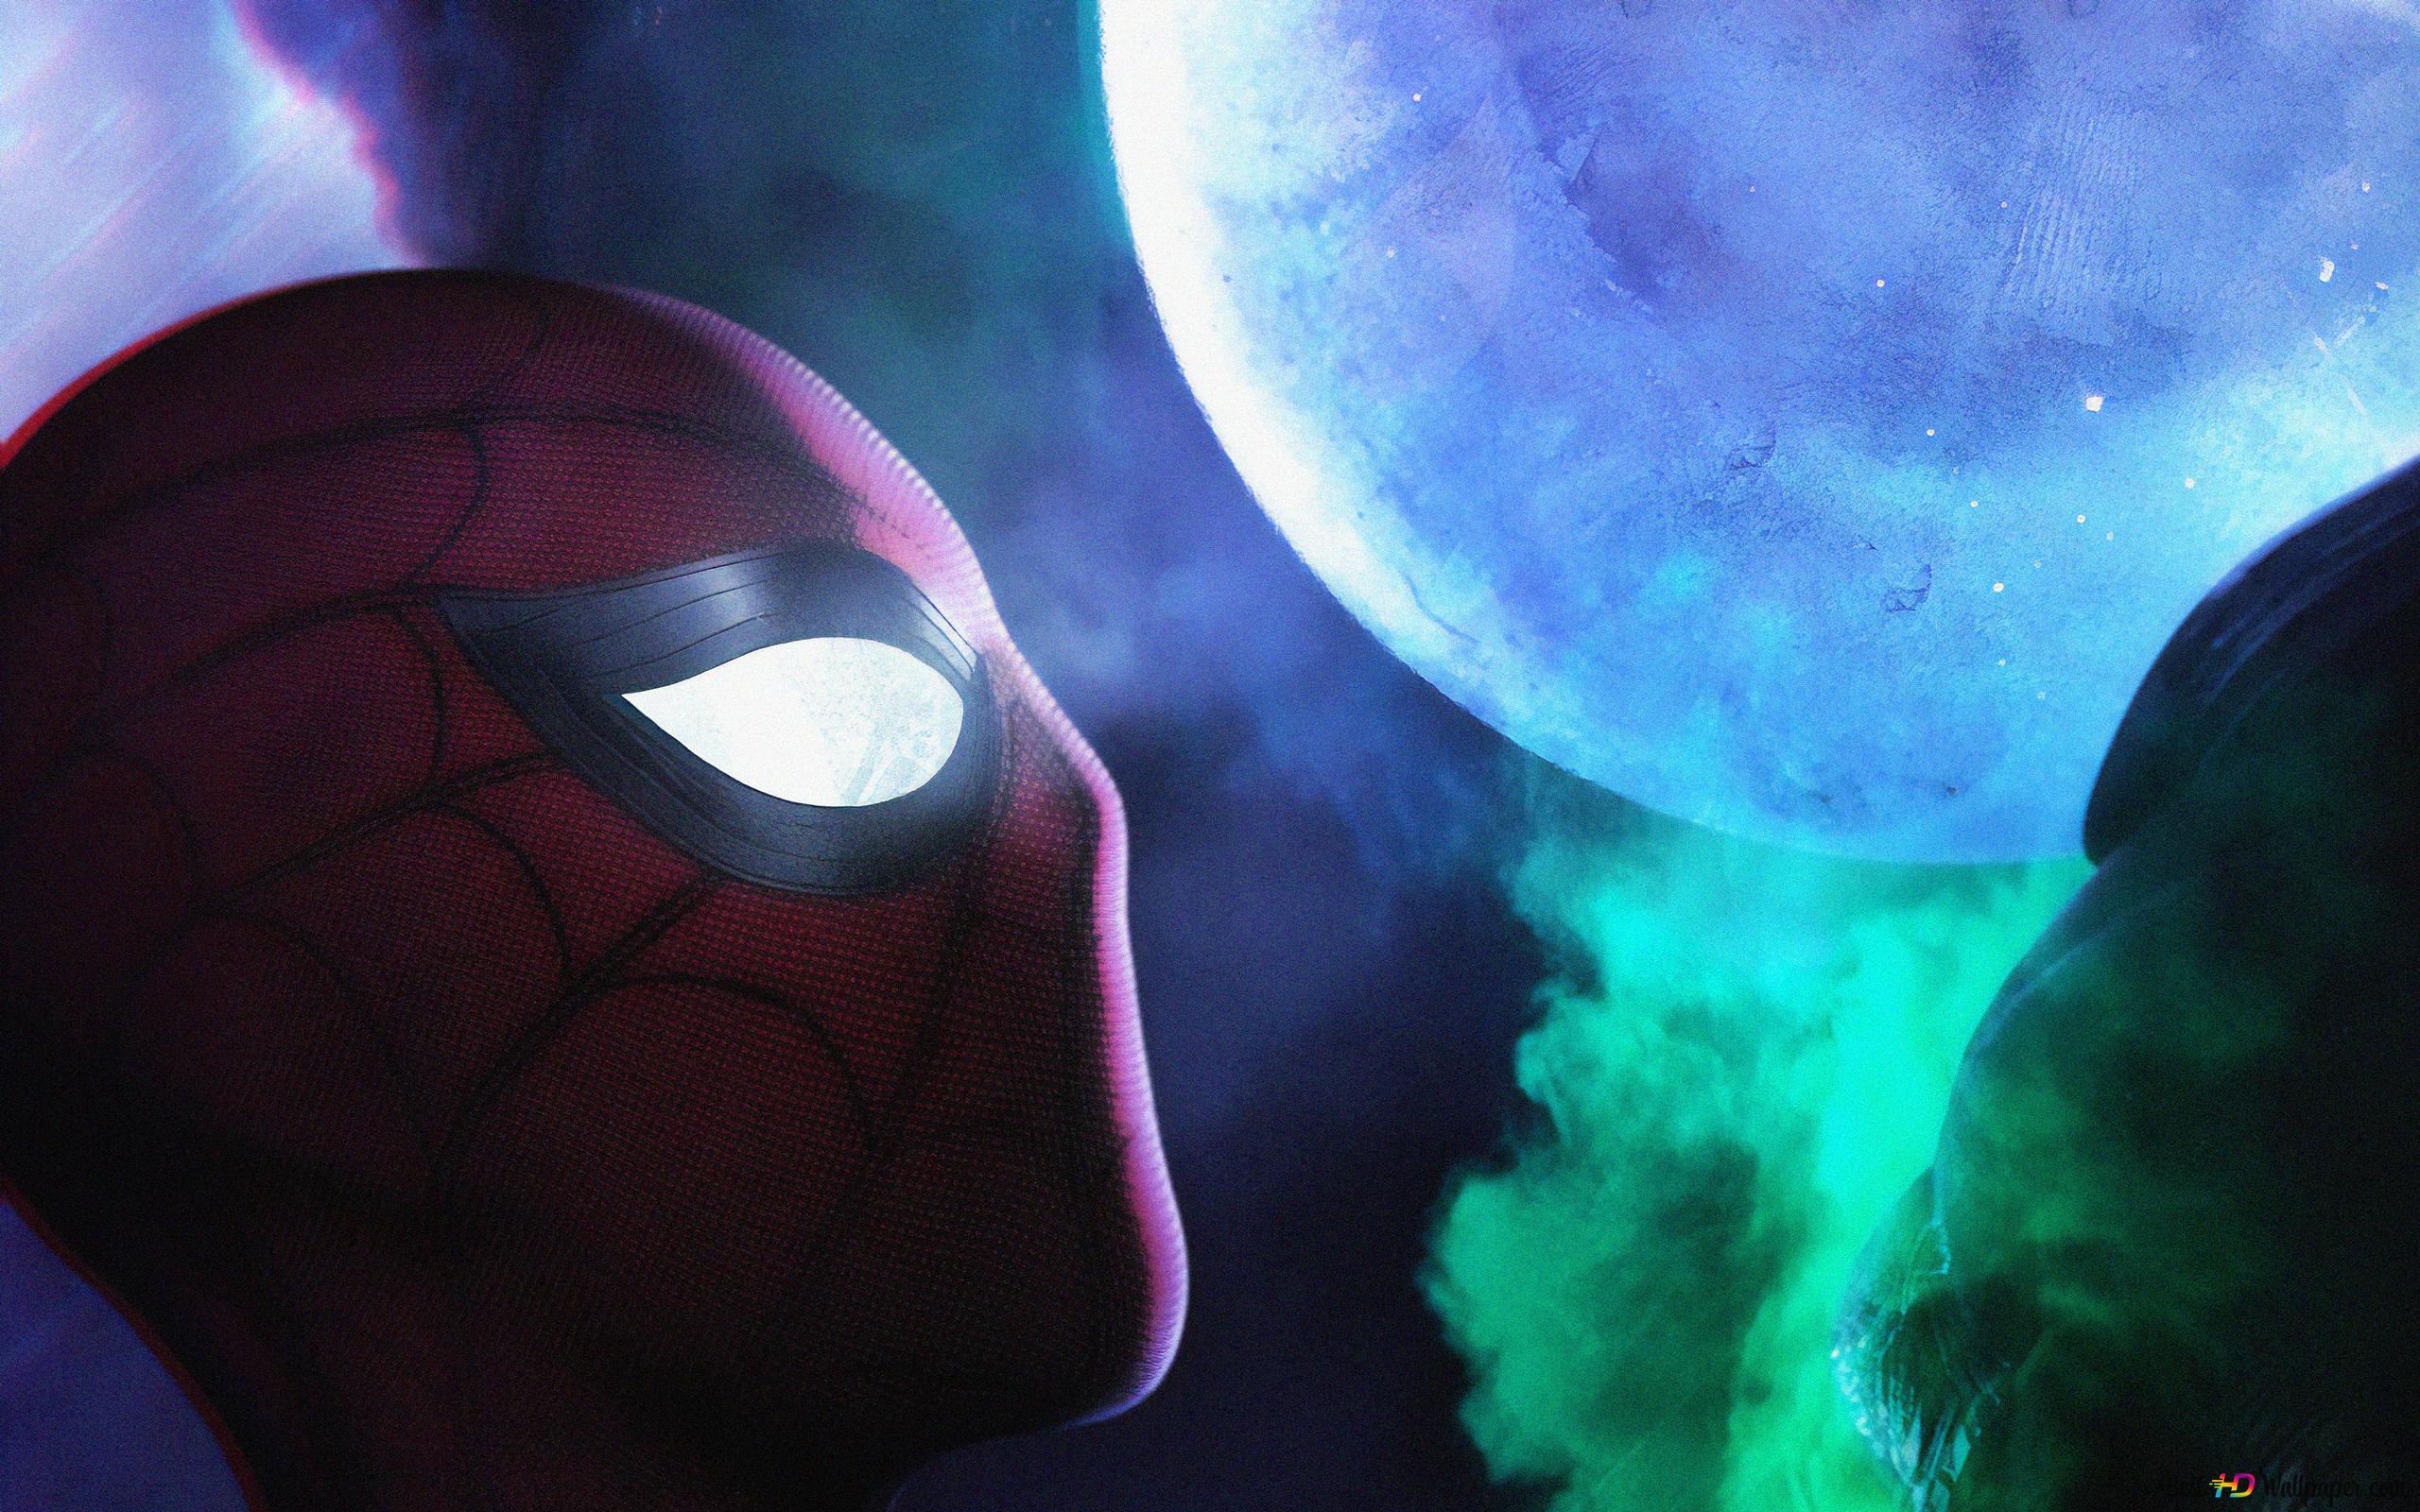 Mysterio And Spiderman Wallpapers